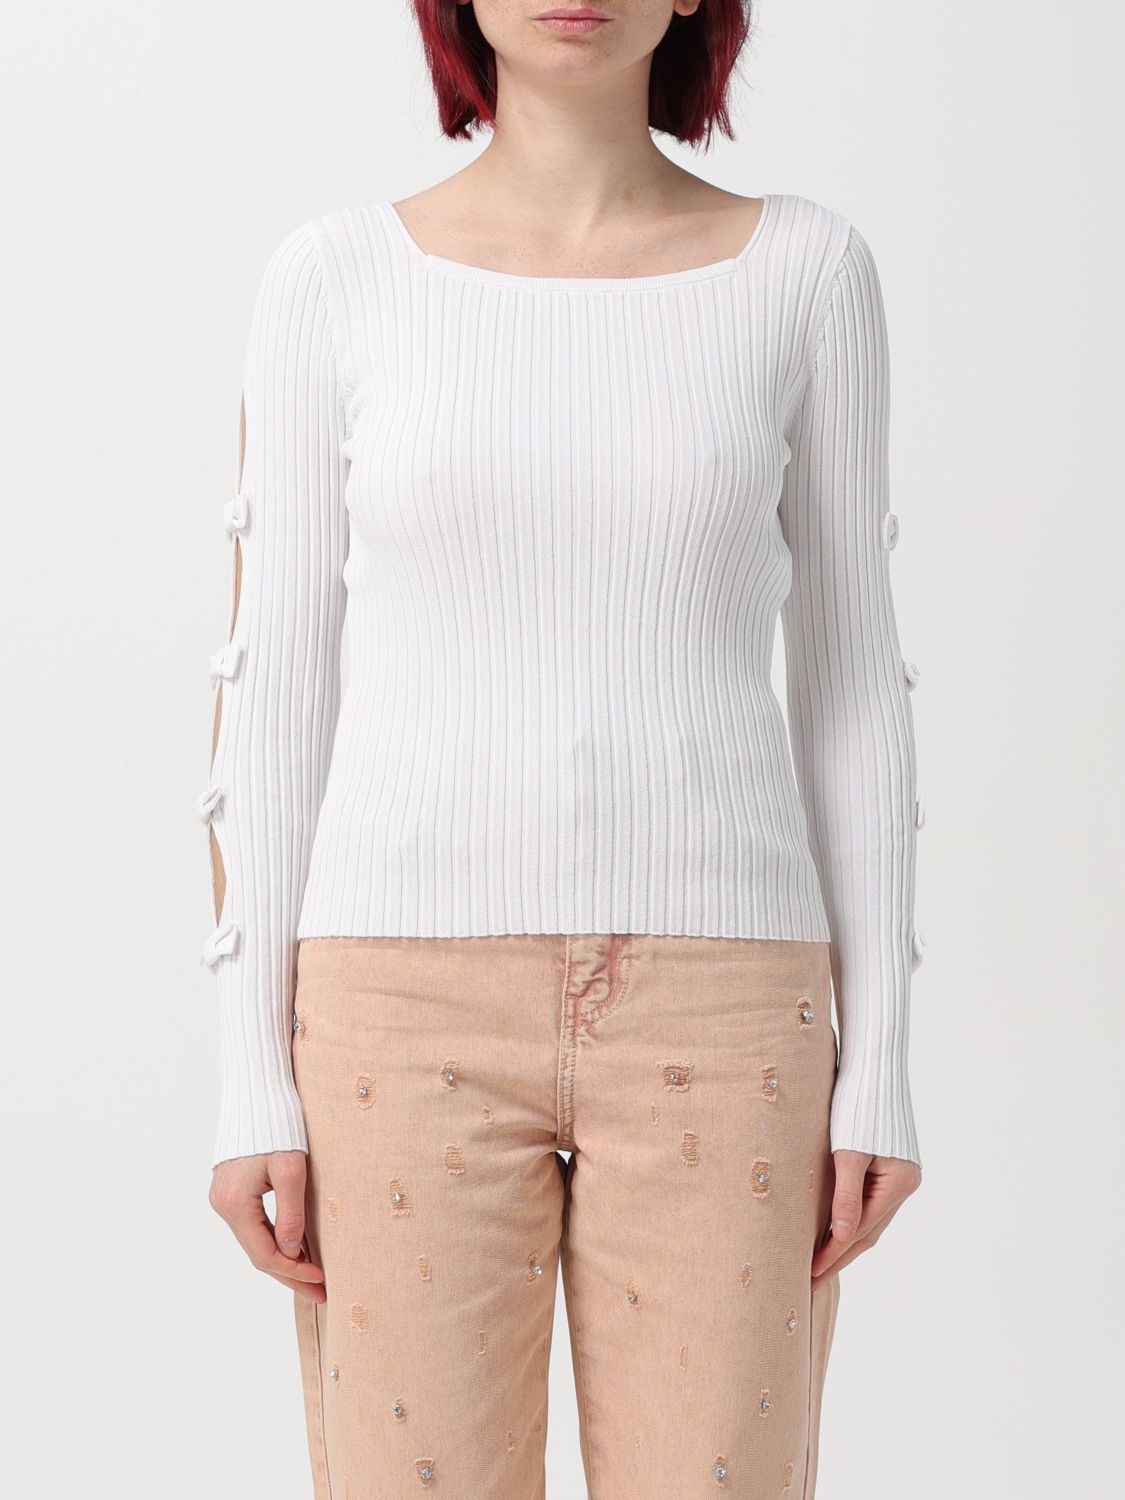 Actitude Twinset Jumper ACTITUDE TWINSET Woman colour White